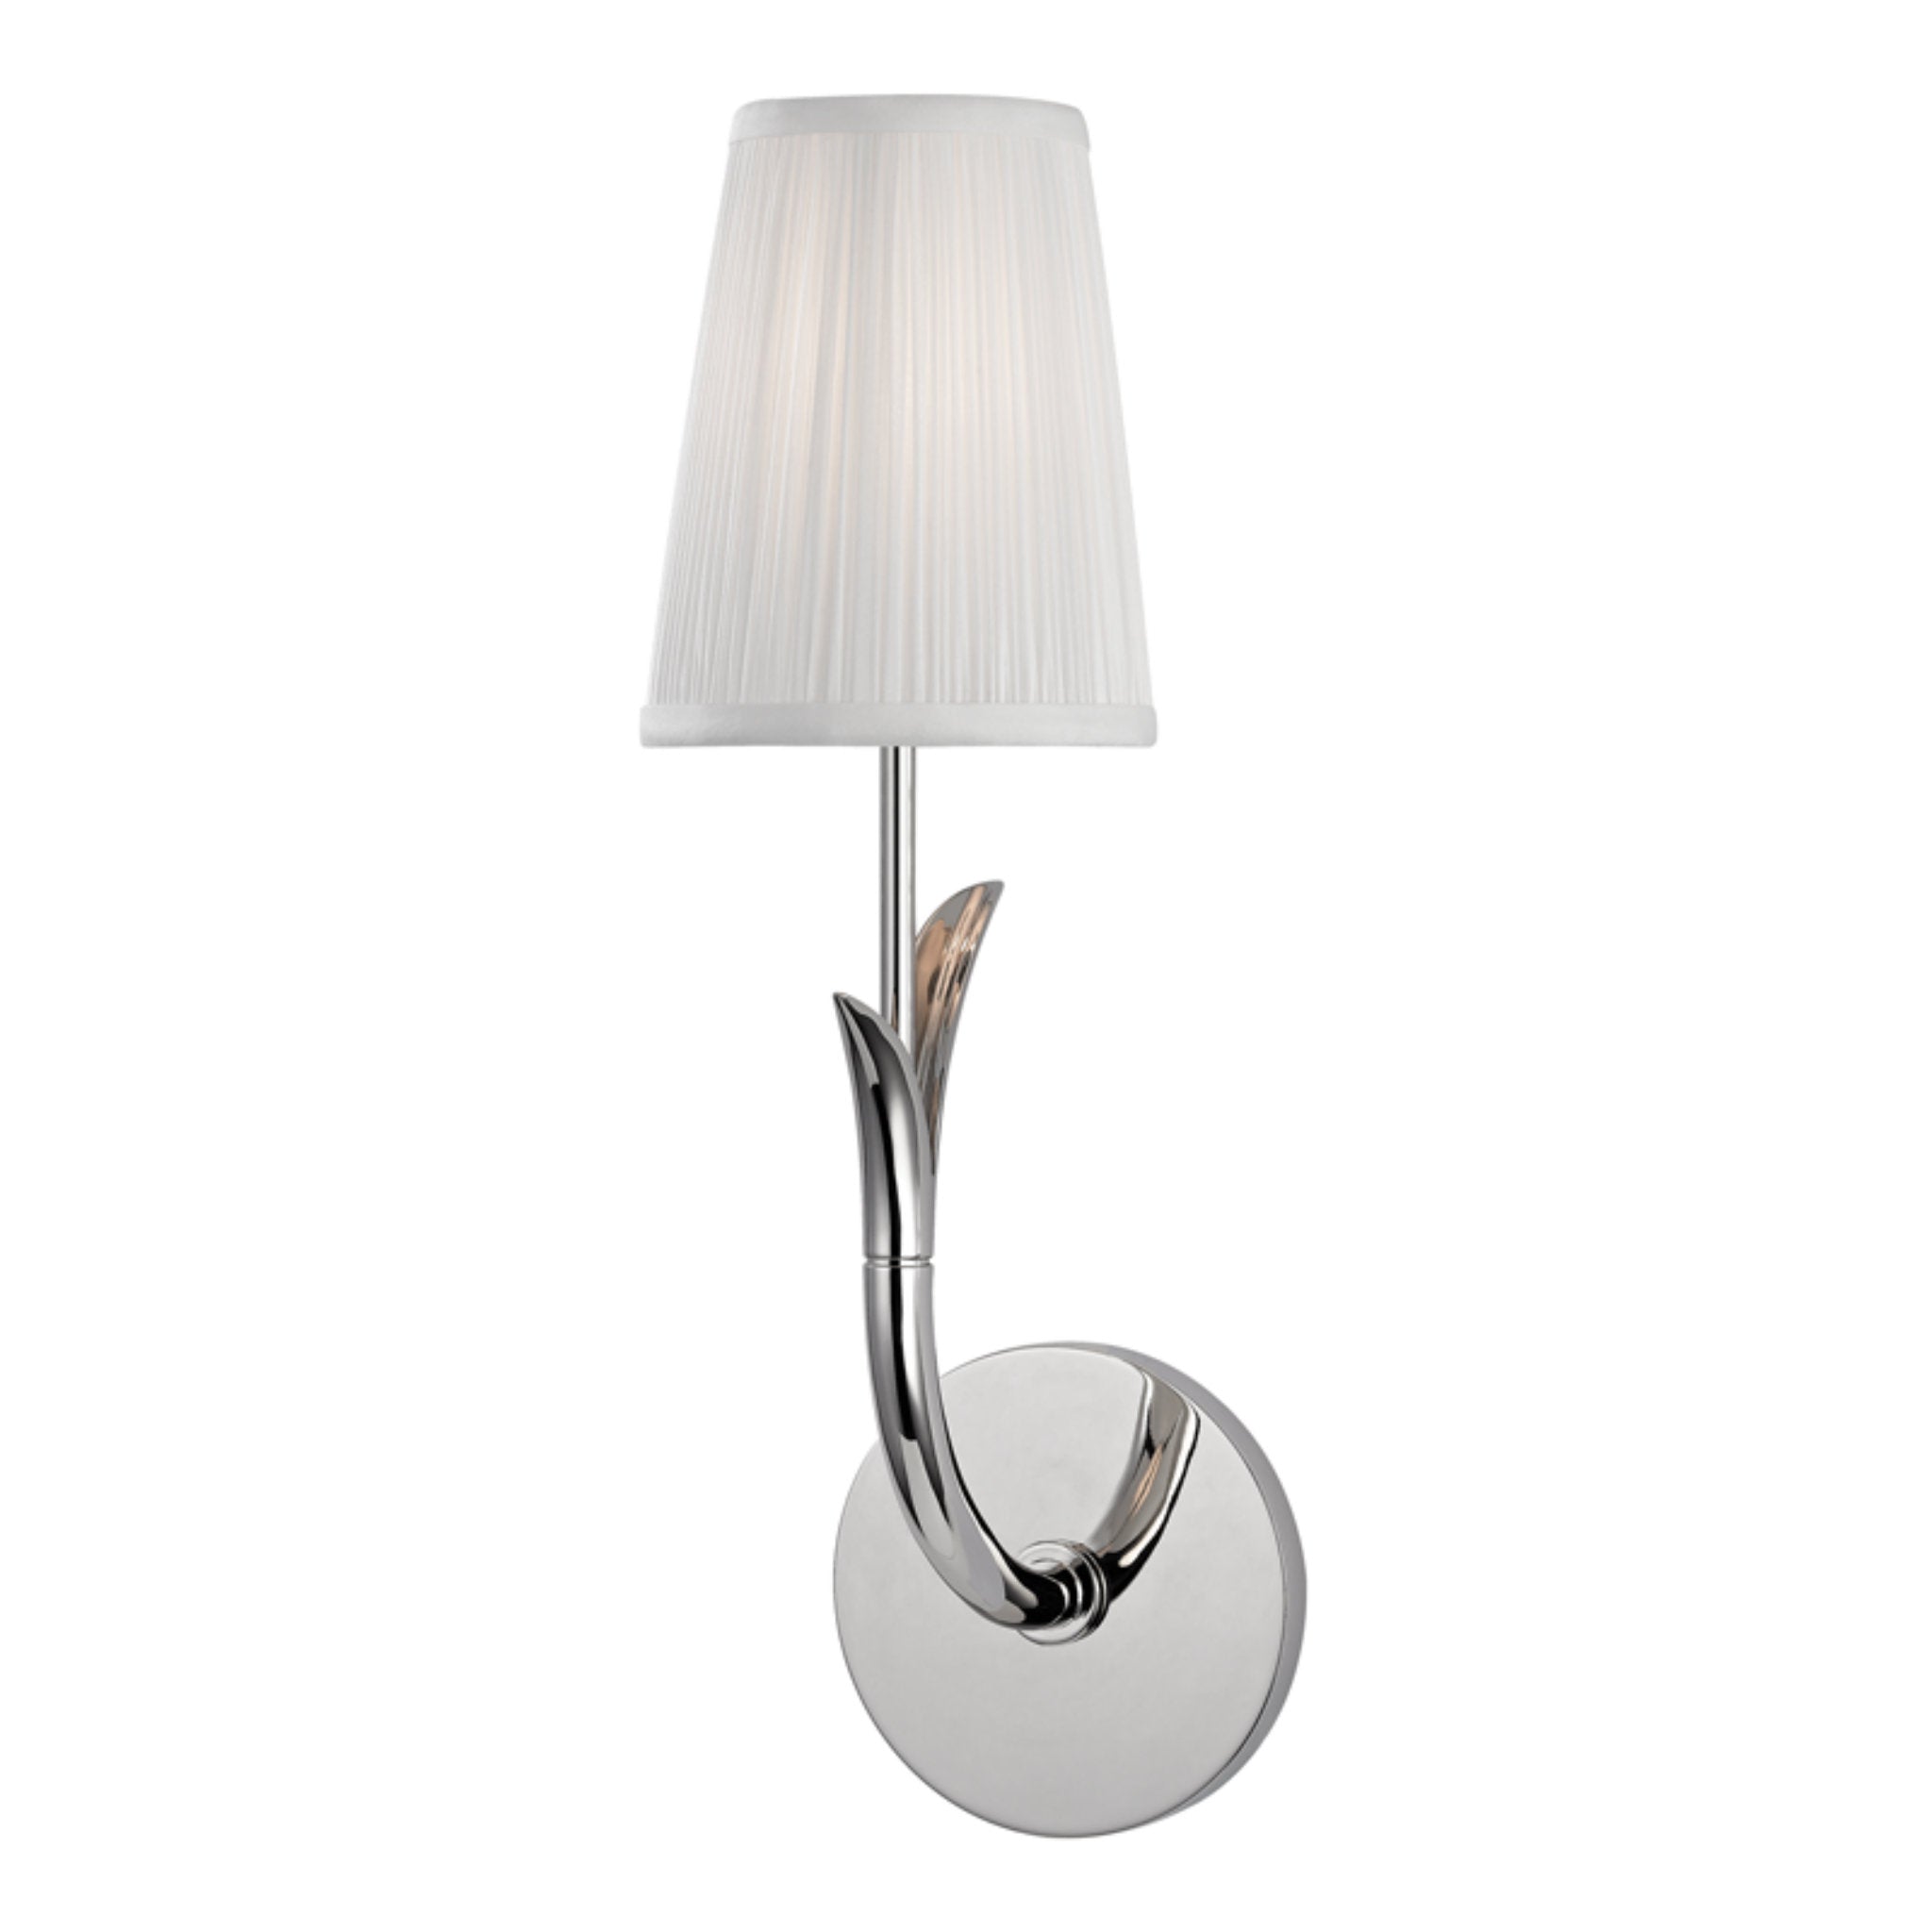 Deering 1 Light Wall Sconce in Polished Nickel